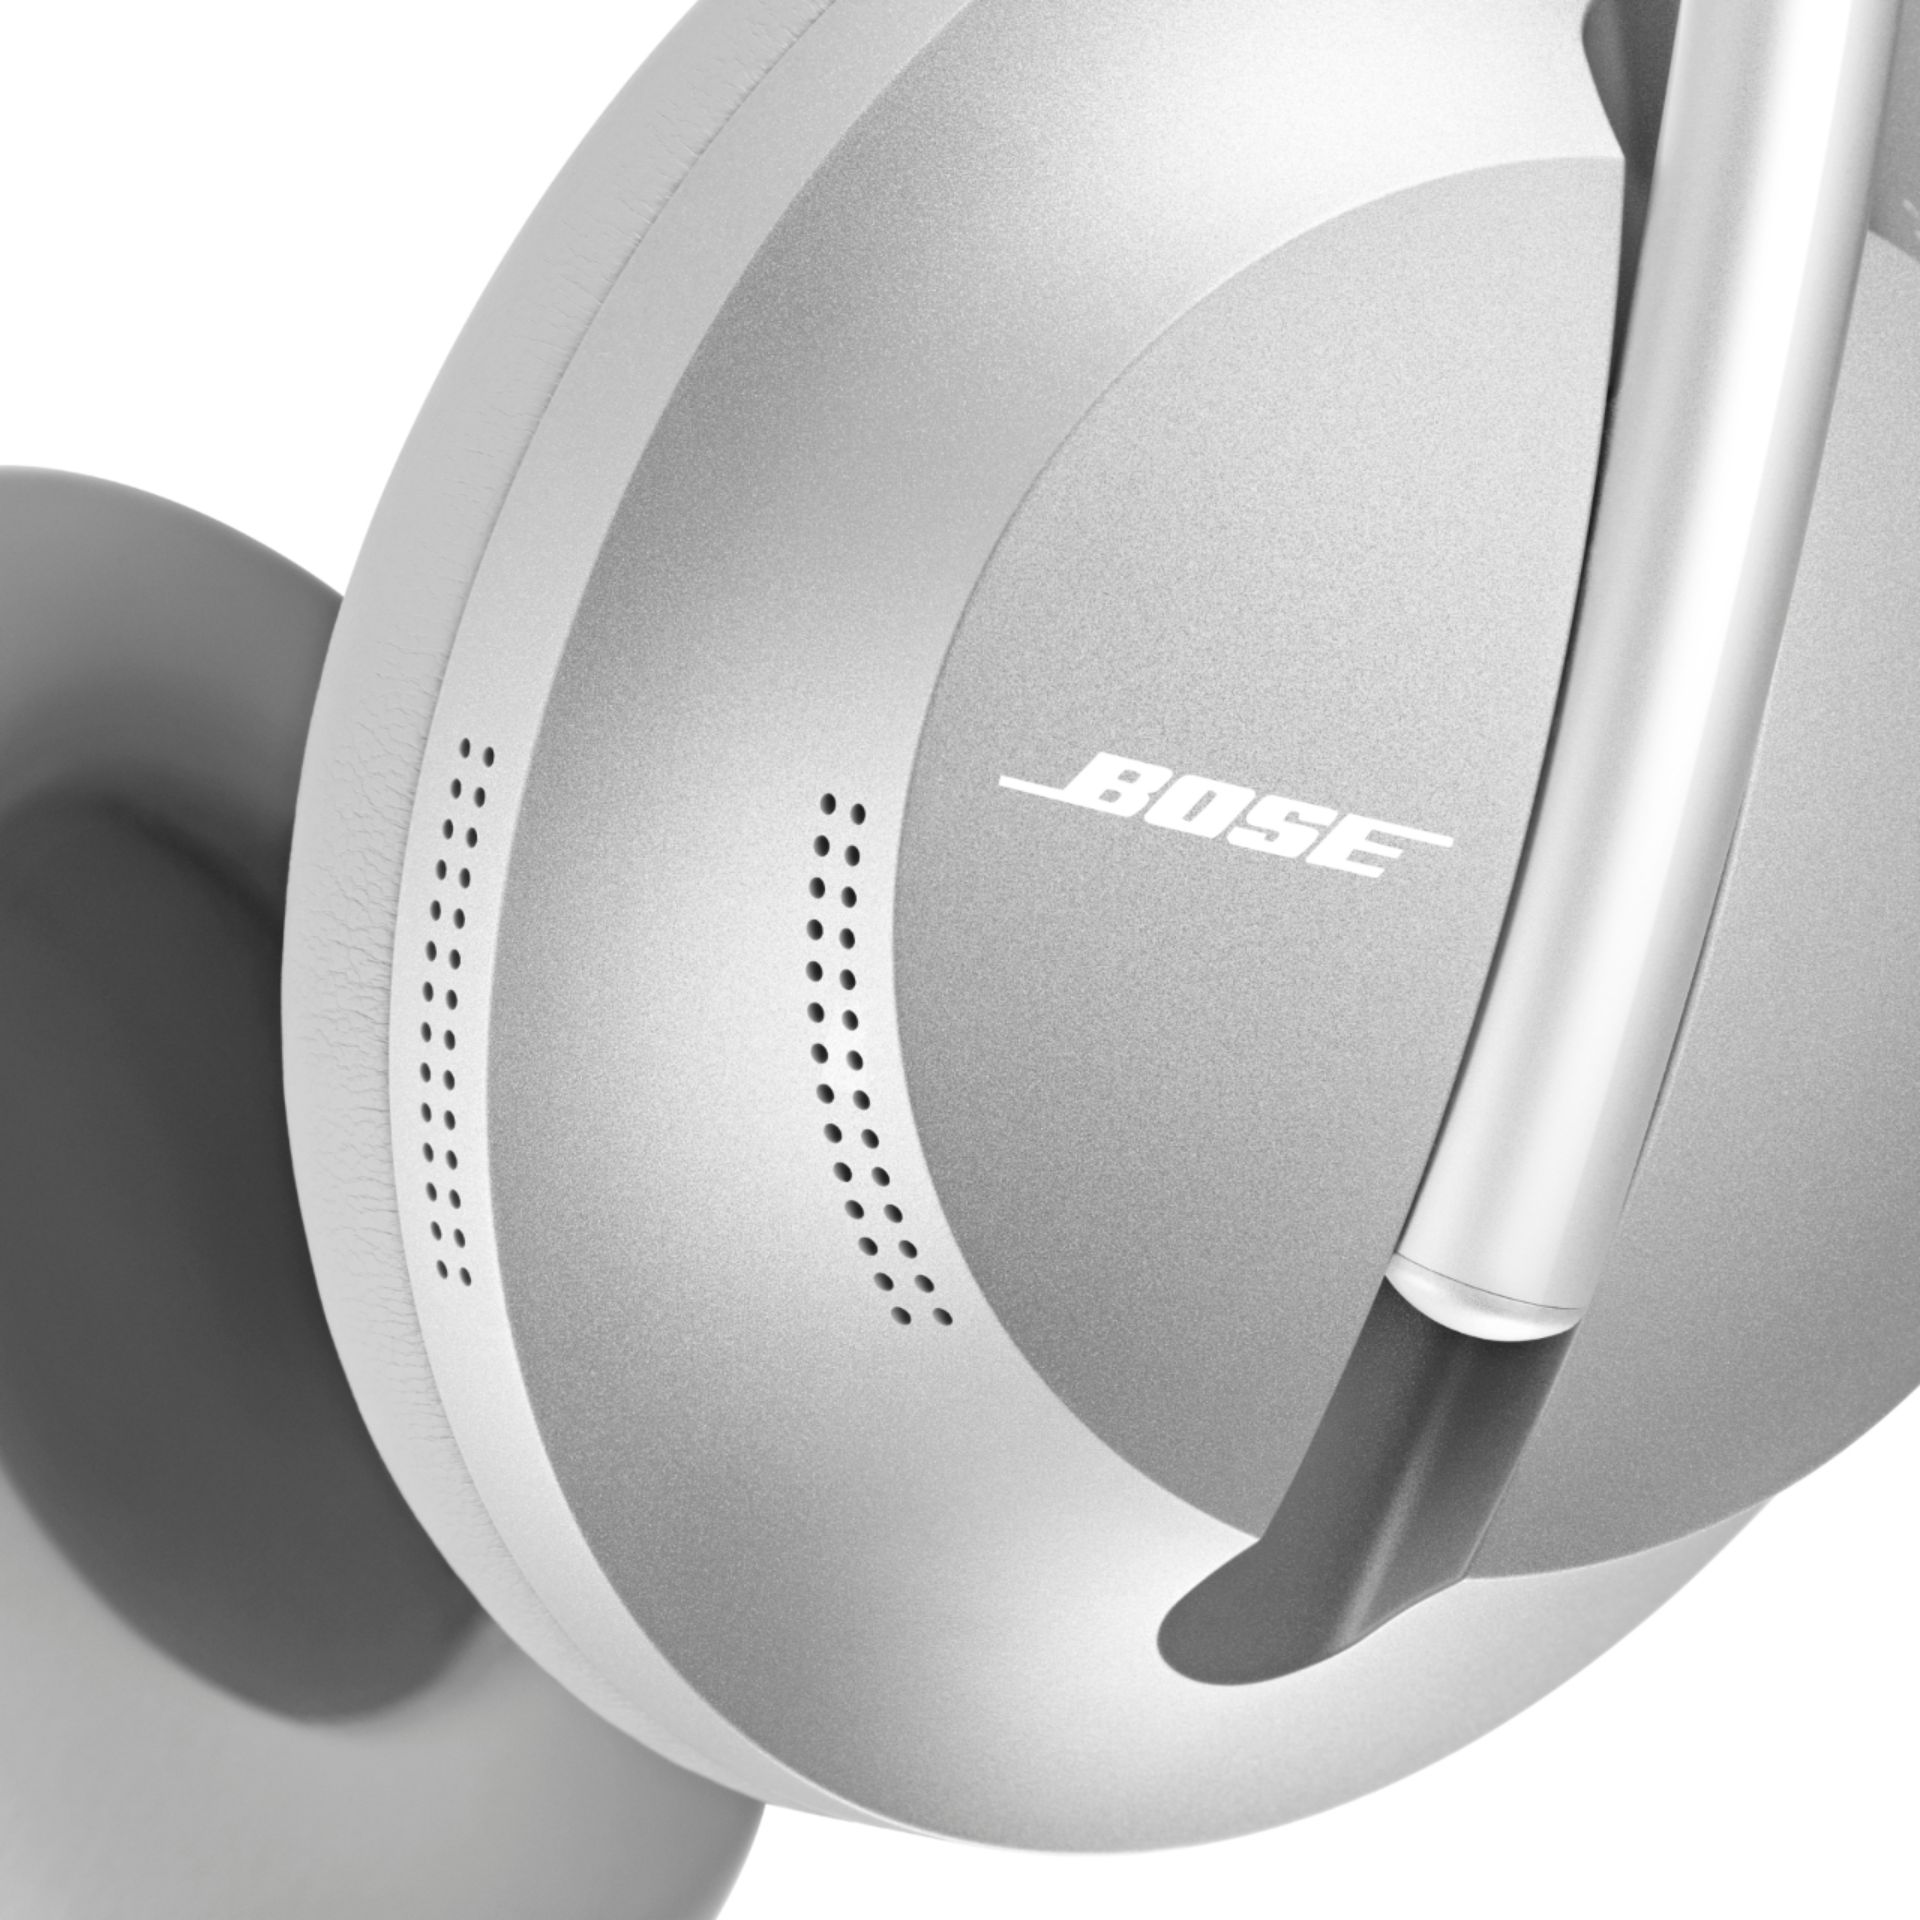 Bose Headphones Noise Cancelling Over-the-Ear Headphones Luxe Silver 794297-0300 Buy